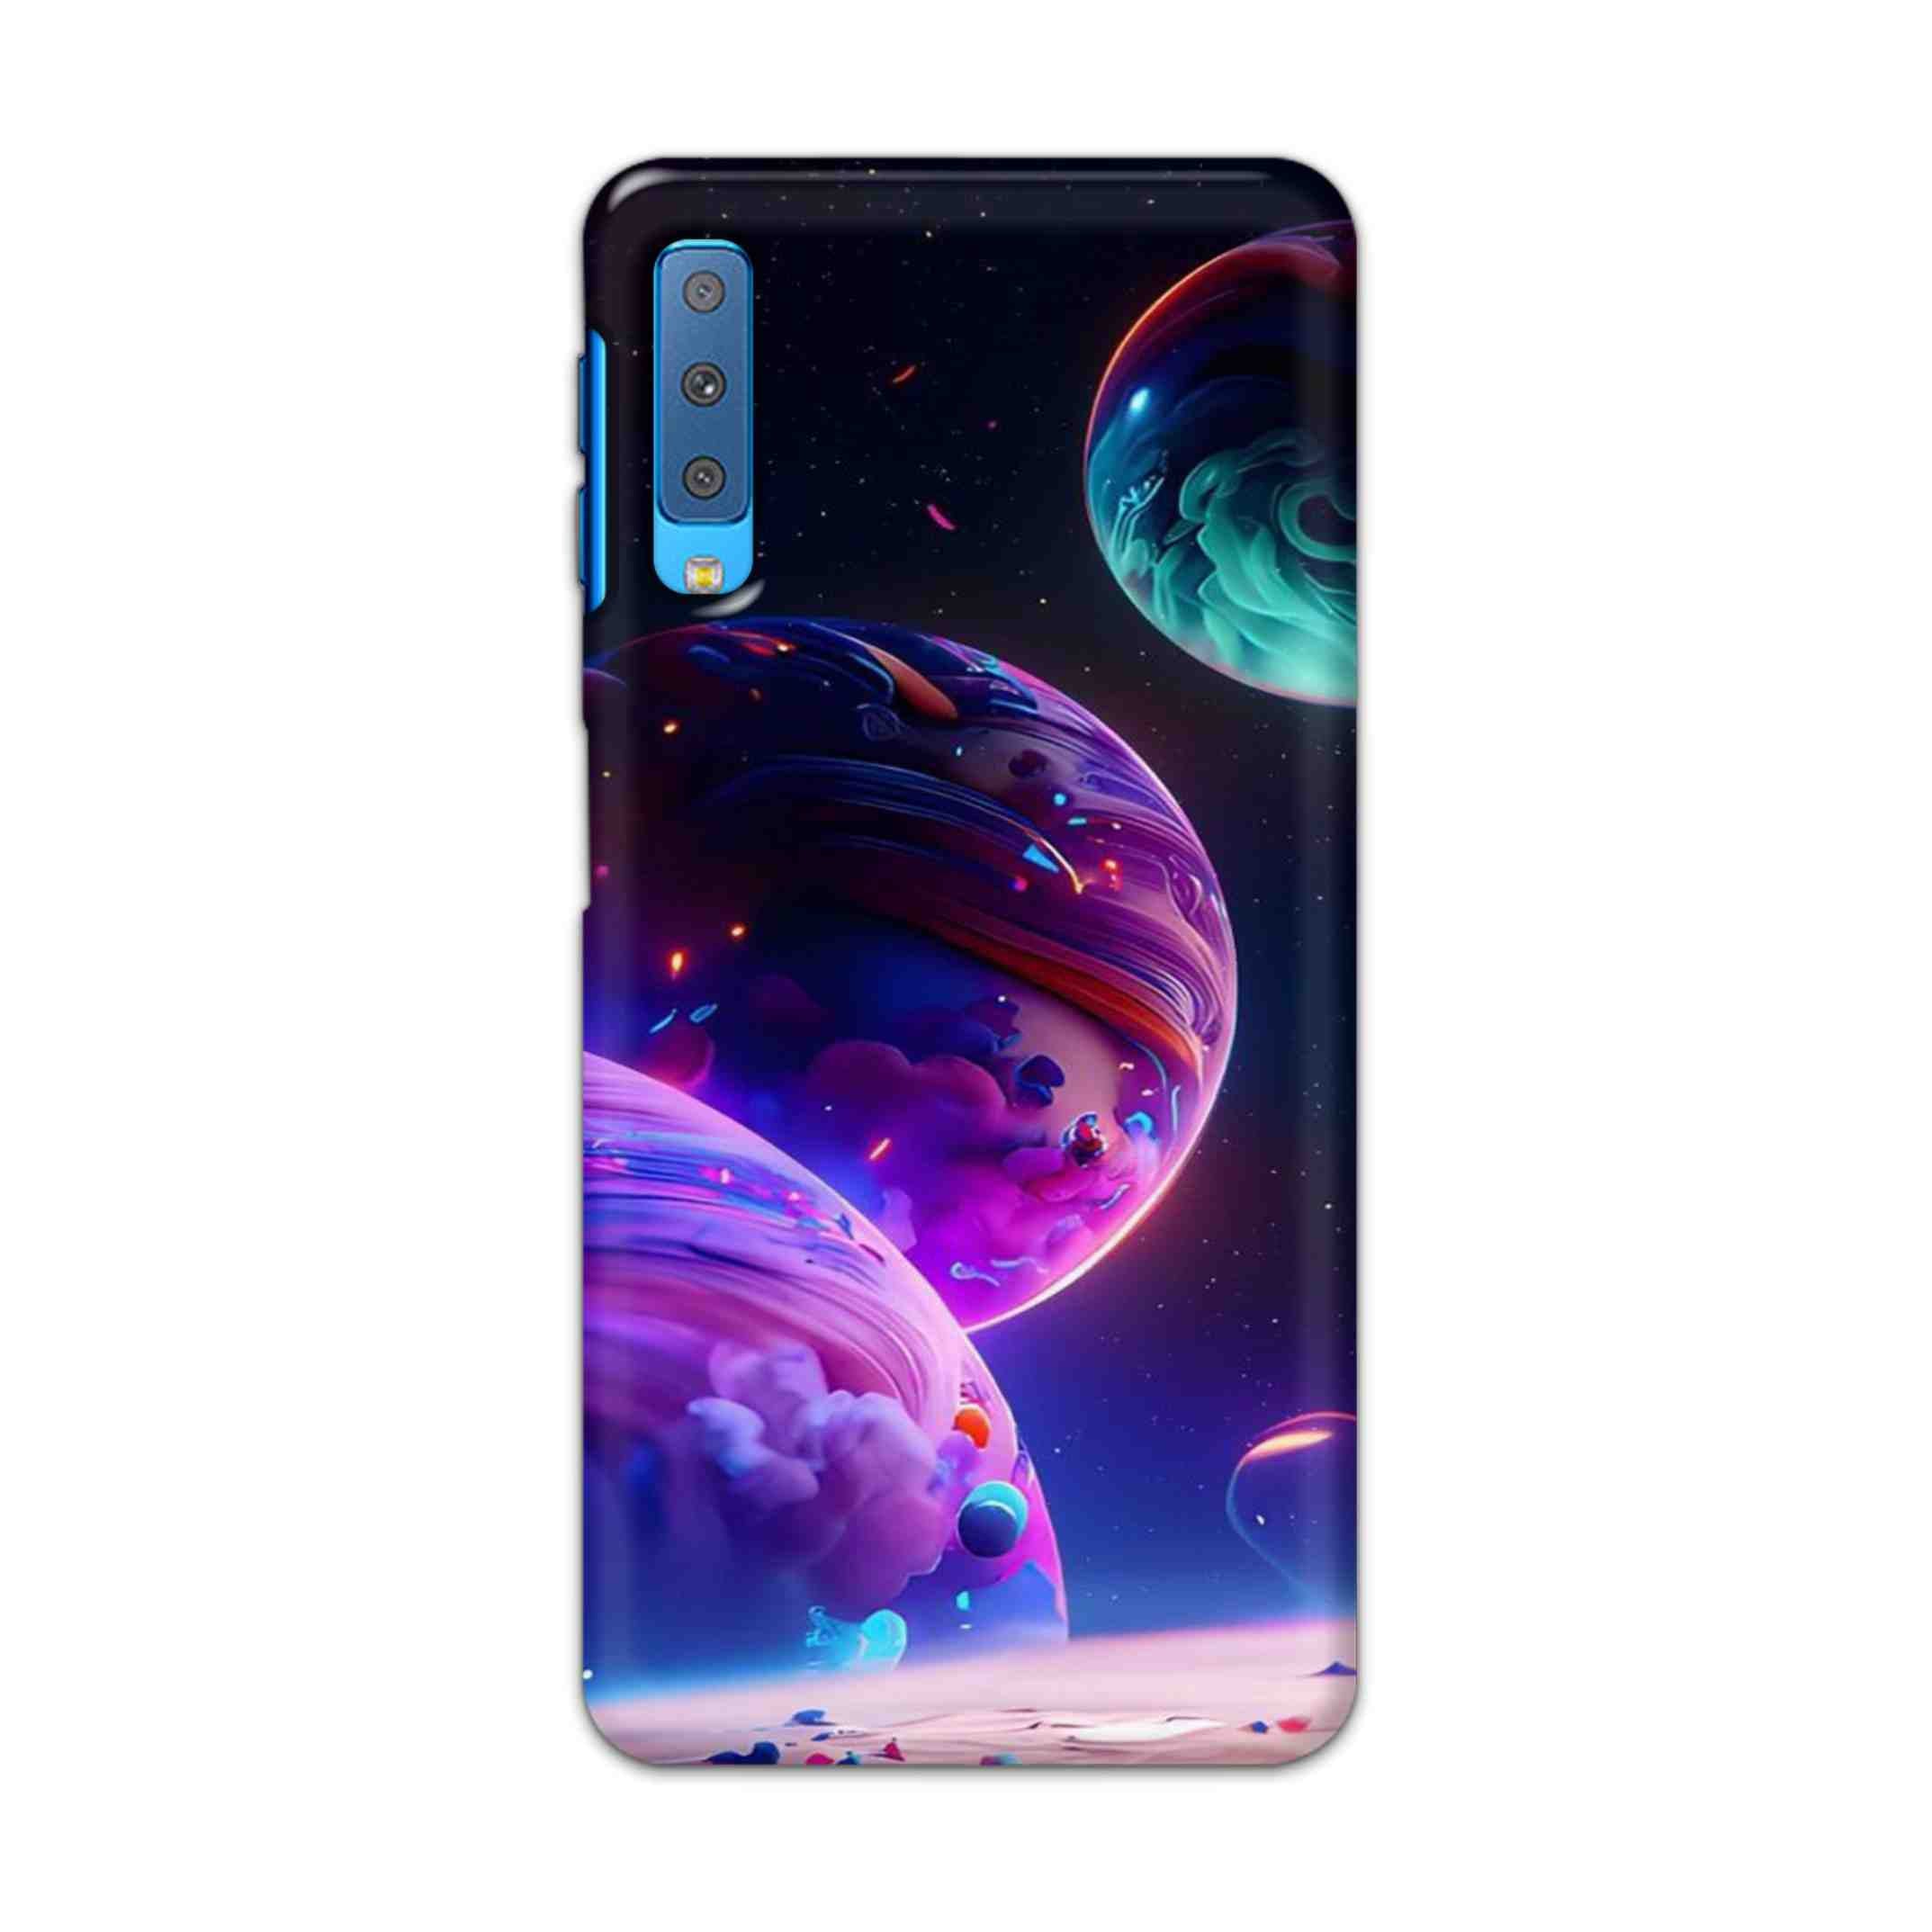 Buy 3 Earth Hard Back Mobile Phone Case Cover For Samsung Galaxy A7 2018 Online